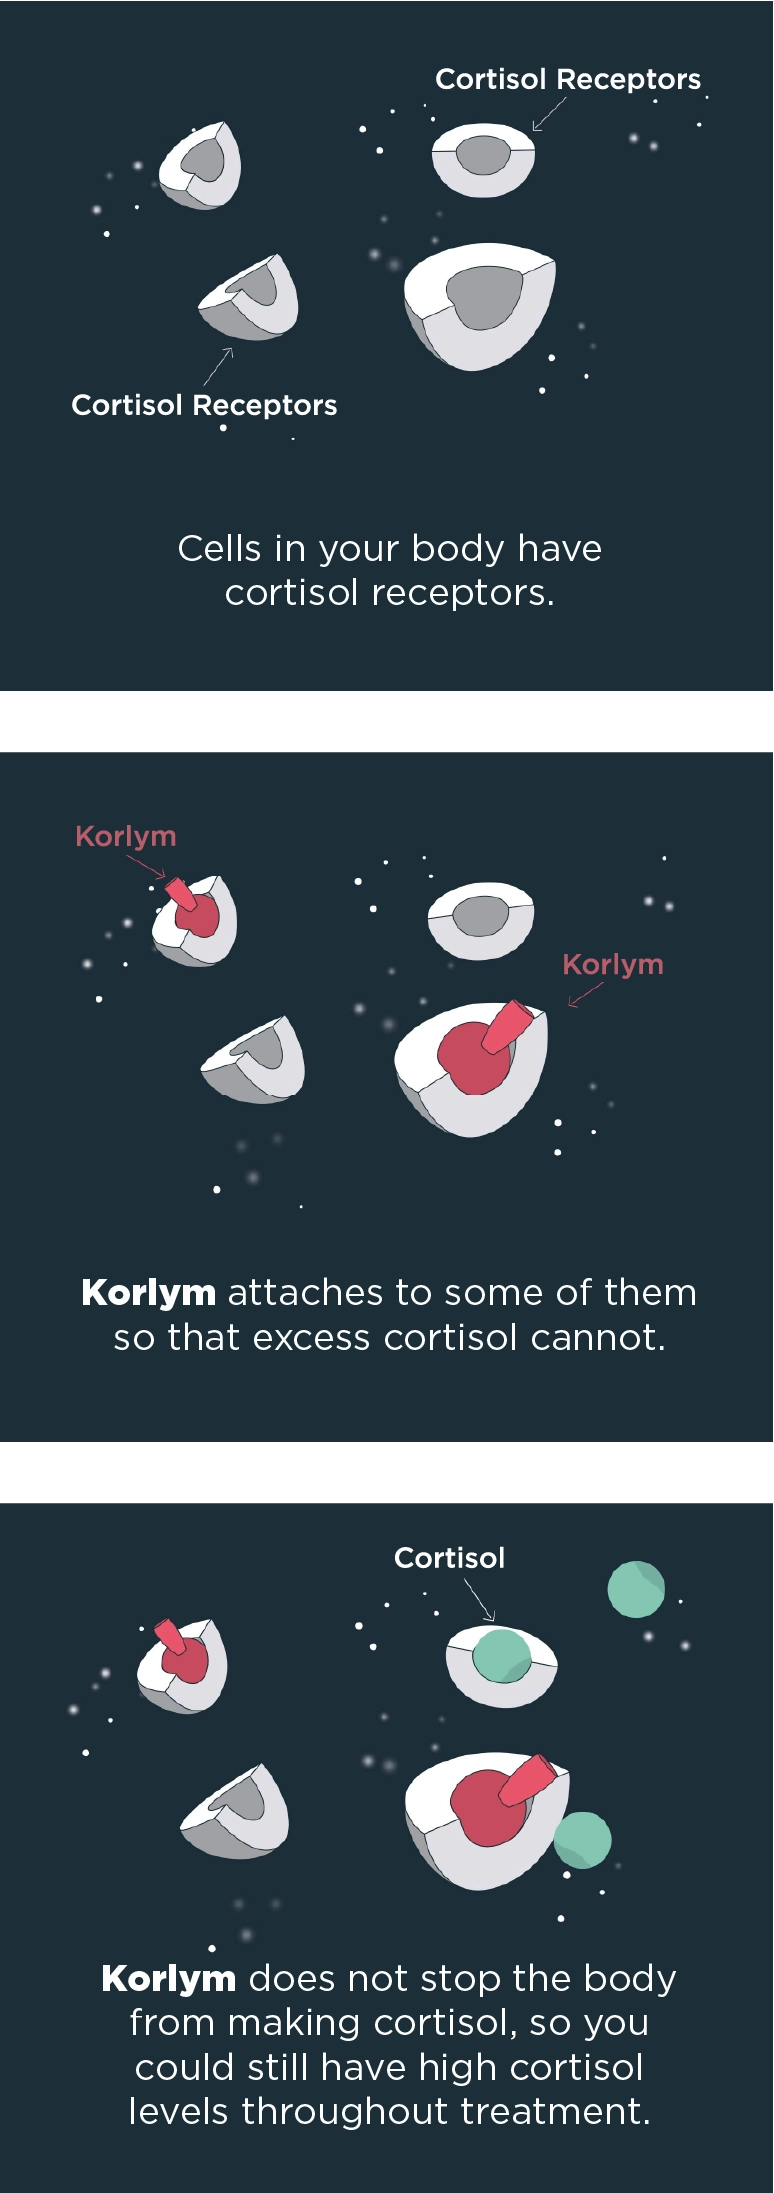 Three animated graphics that show the progression of how Korlym attaches to the cortisol receptors to limit cortisol activity in your body